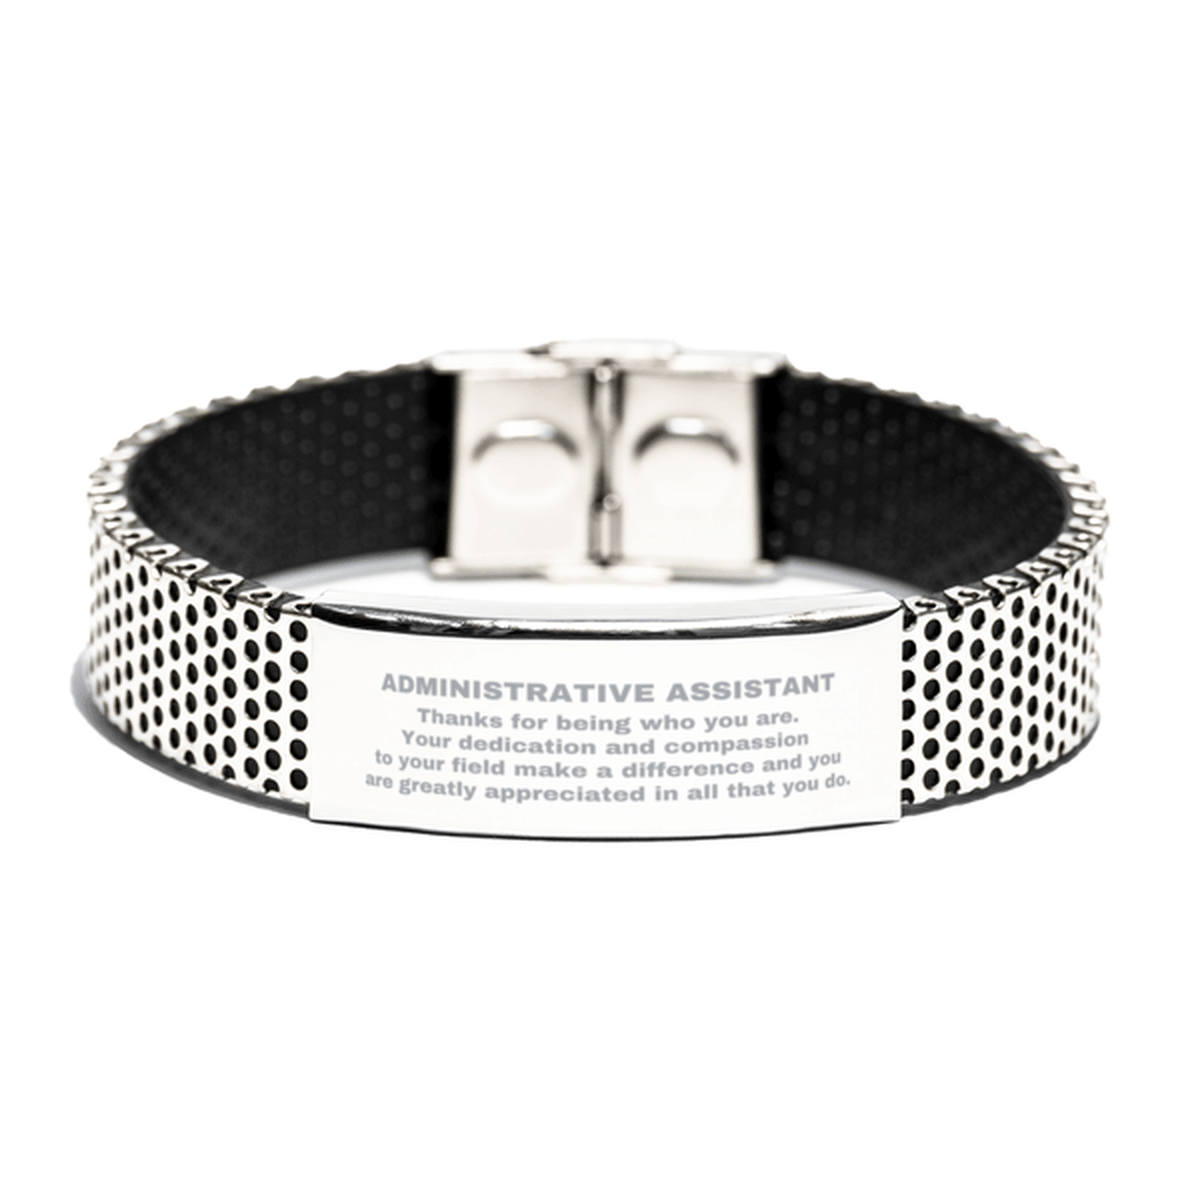 Administrative Assistant Silver Shark Mesh Stainless Steel Engraved Bracelet - Thanks for being who you are - Birthday Christmas Jewelry Gifts Coworkers Colleague Boss - Mallard Moon Gift Shop